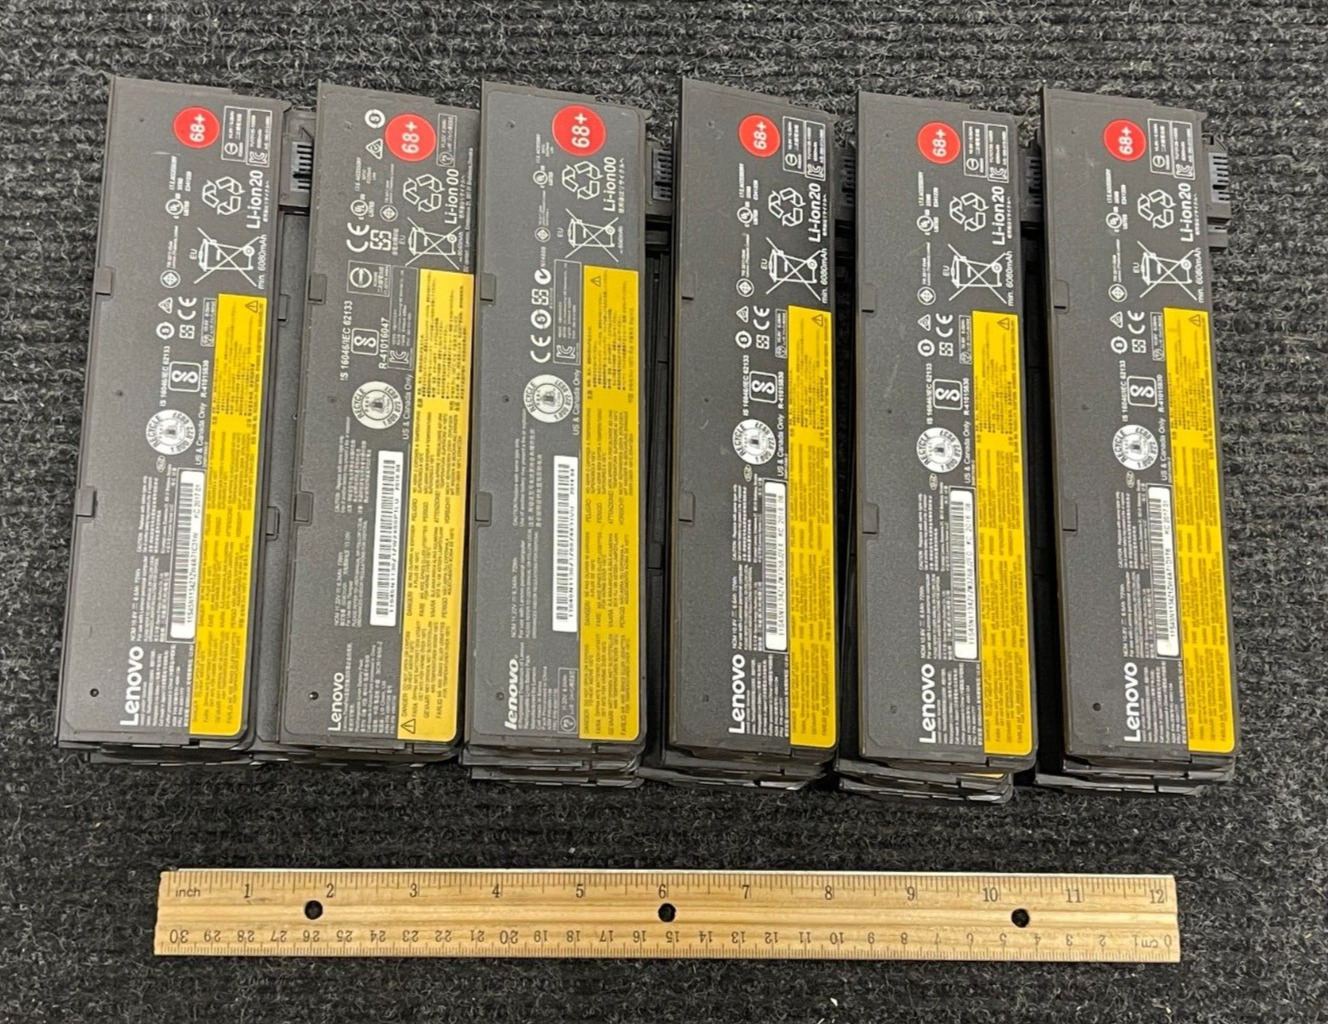 Lot of 18 Lenovo 68+ 72W Laptop Battery (As-Is)